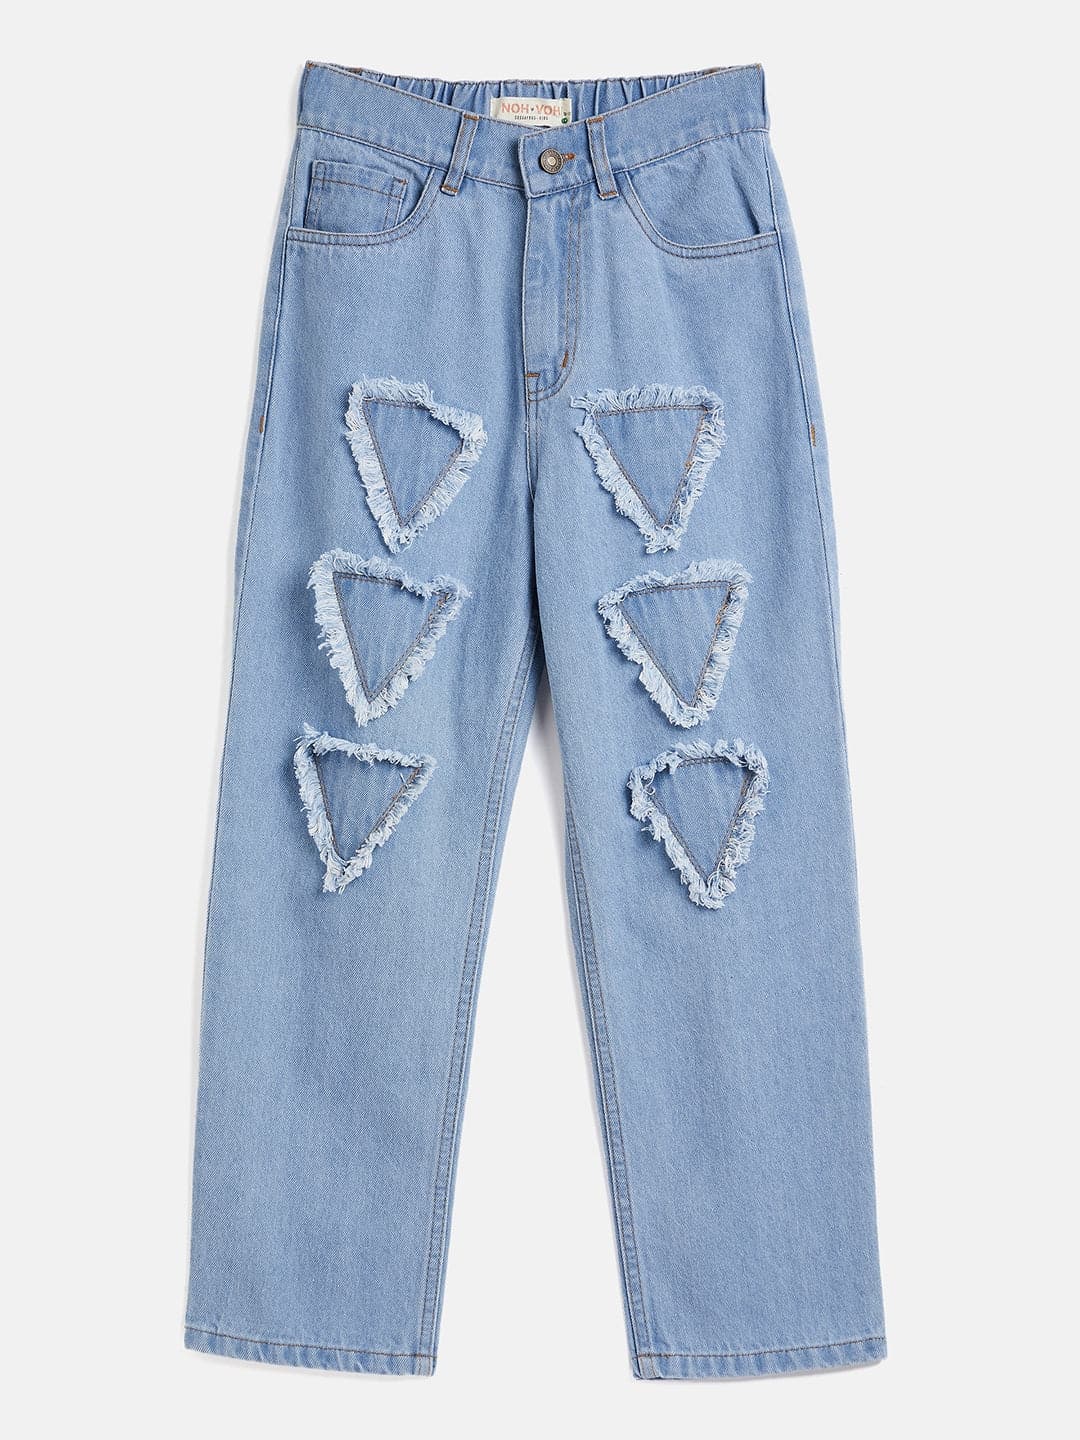 Girl's Ice Blue Triangle Patch Jeans - LYUSH KIDS